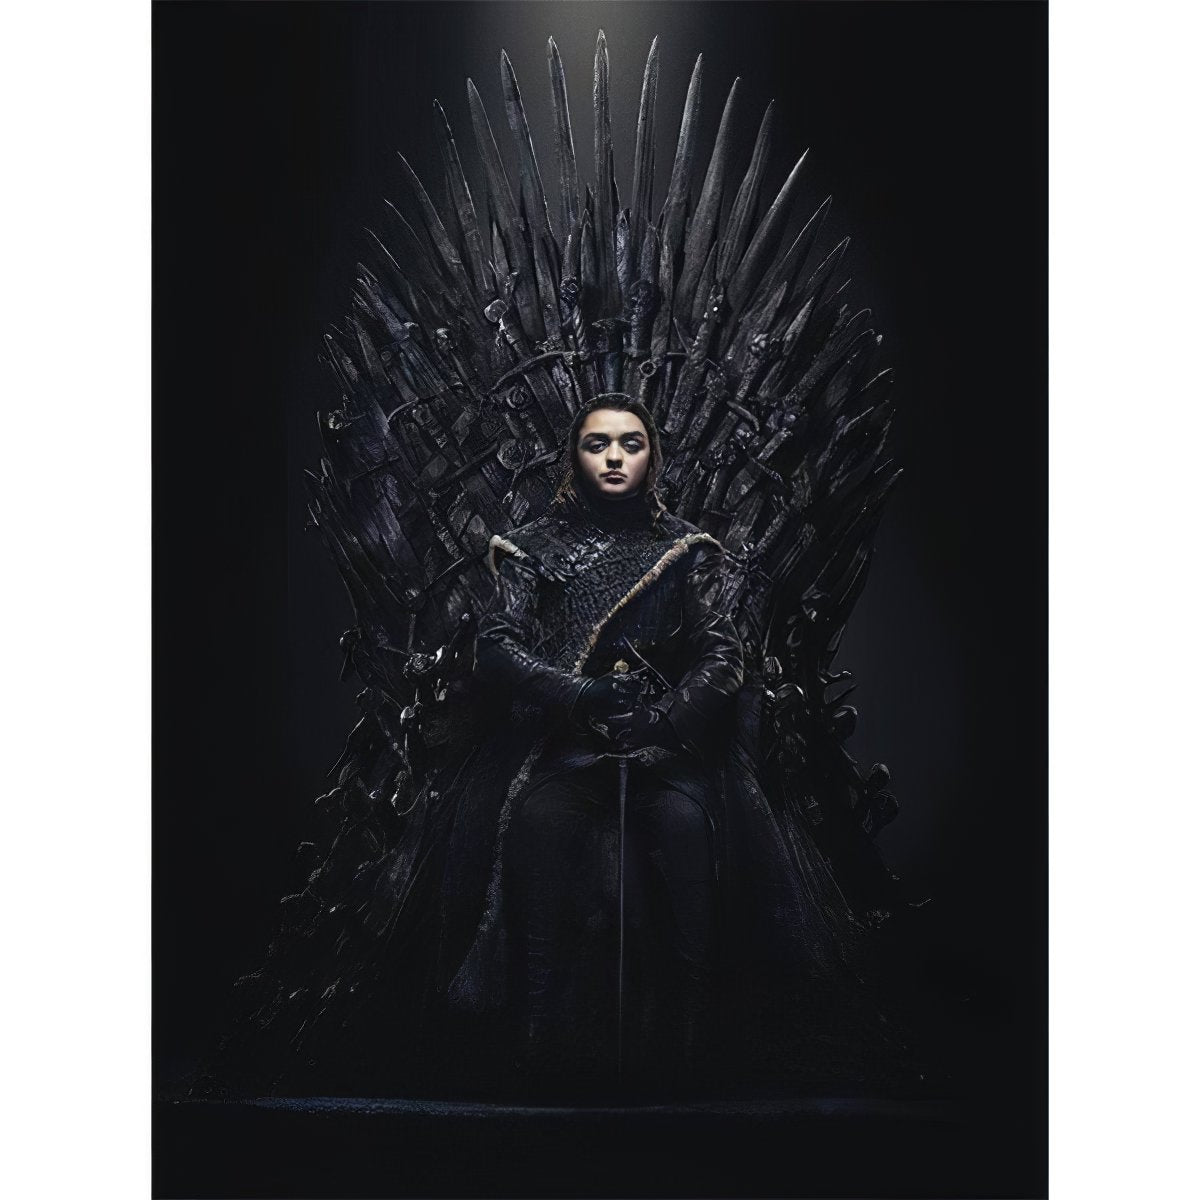 Arya Stark Game of Thrones: A tribute to the fearless survivor Arya Stark Game Of Thrones - Diamondartlove